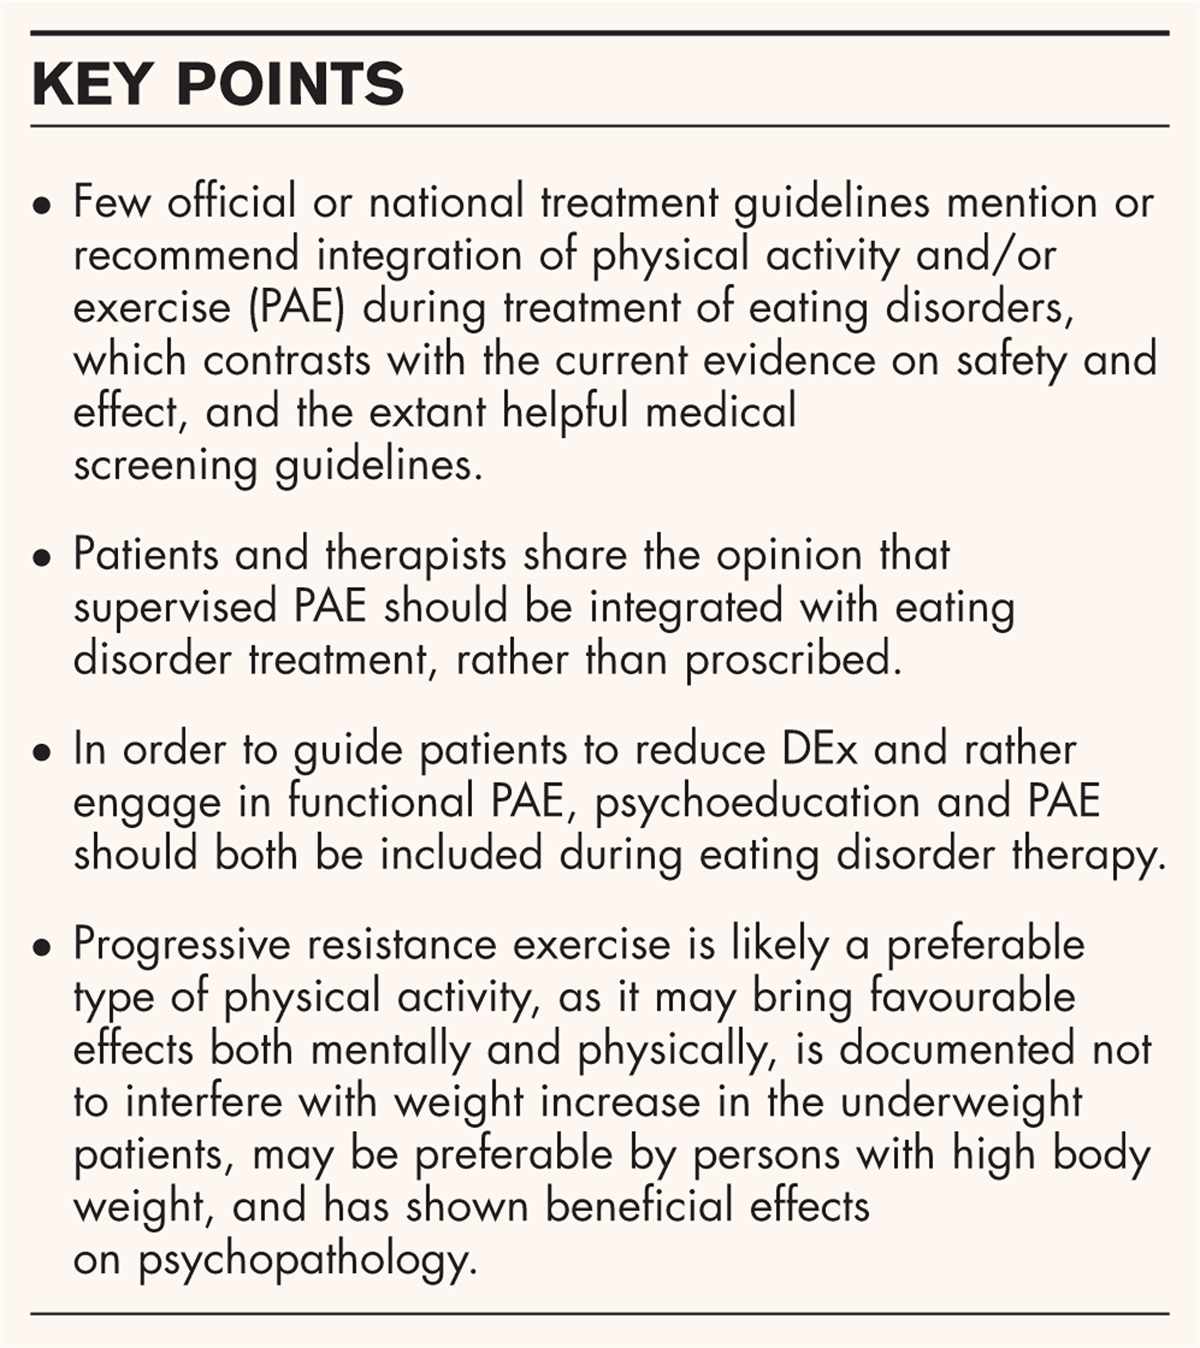 How to address physical activity and exercise during treatment from eating disorders: a scoping review